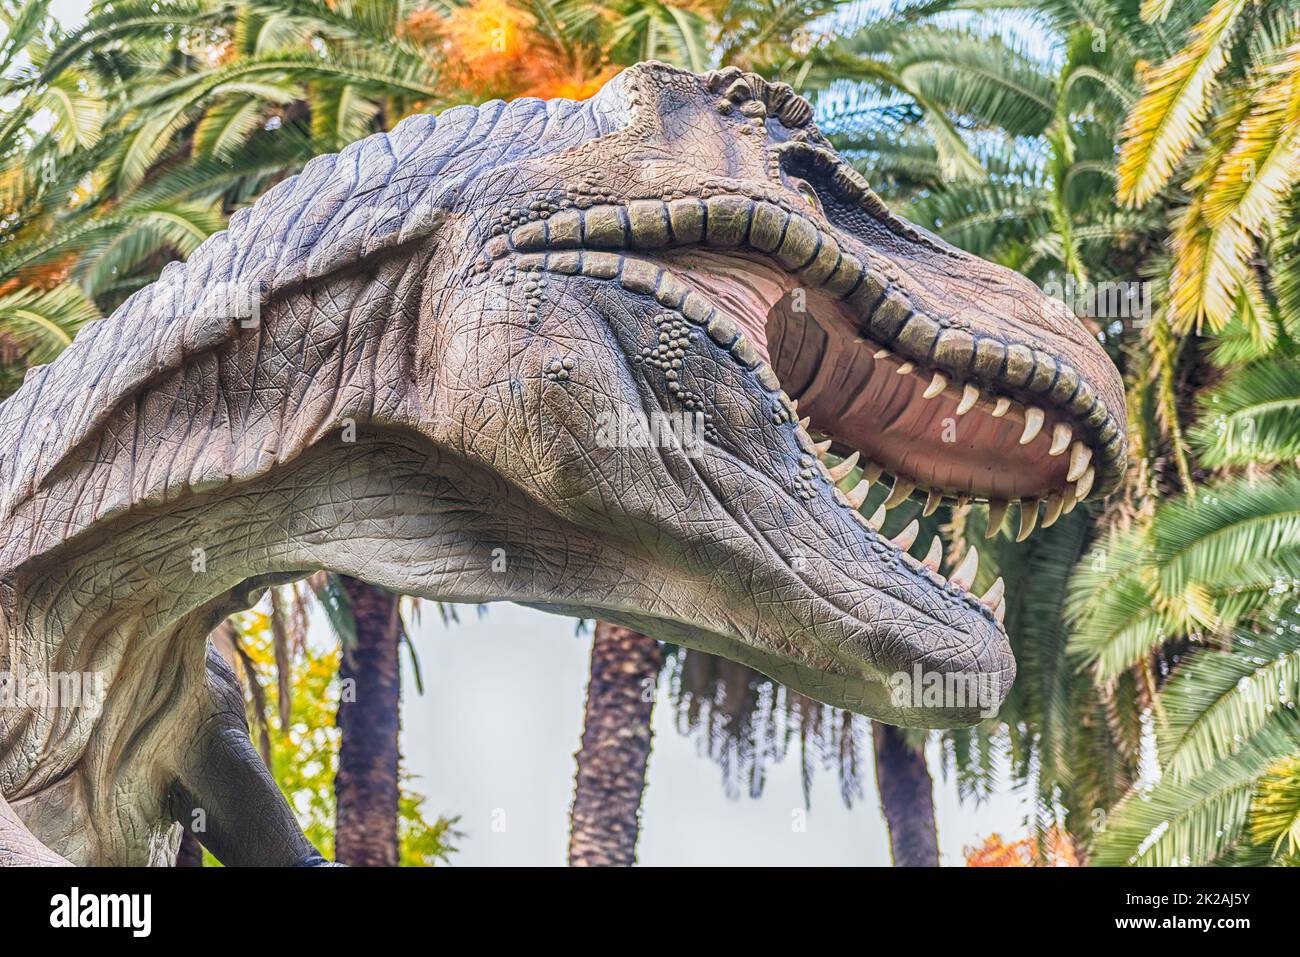 ROME - NOVEMBER 21, 2021: Dinosaurs featured in the exhibition 